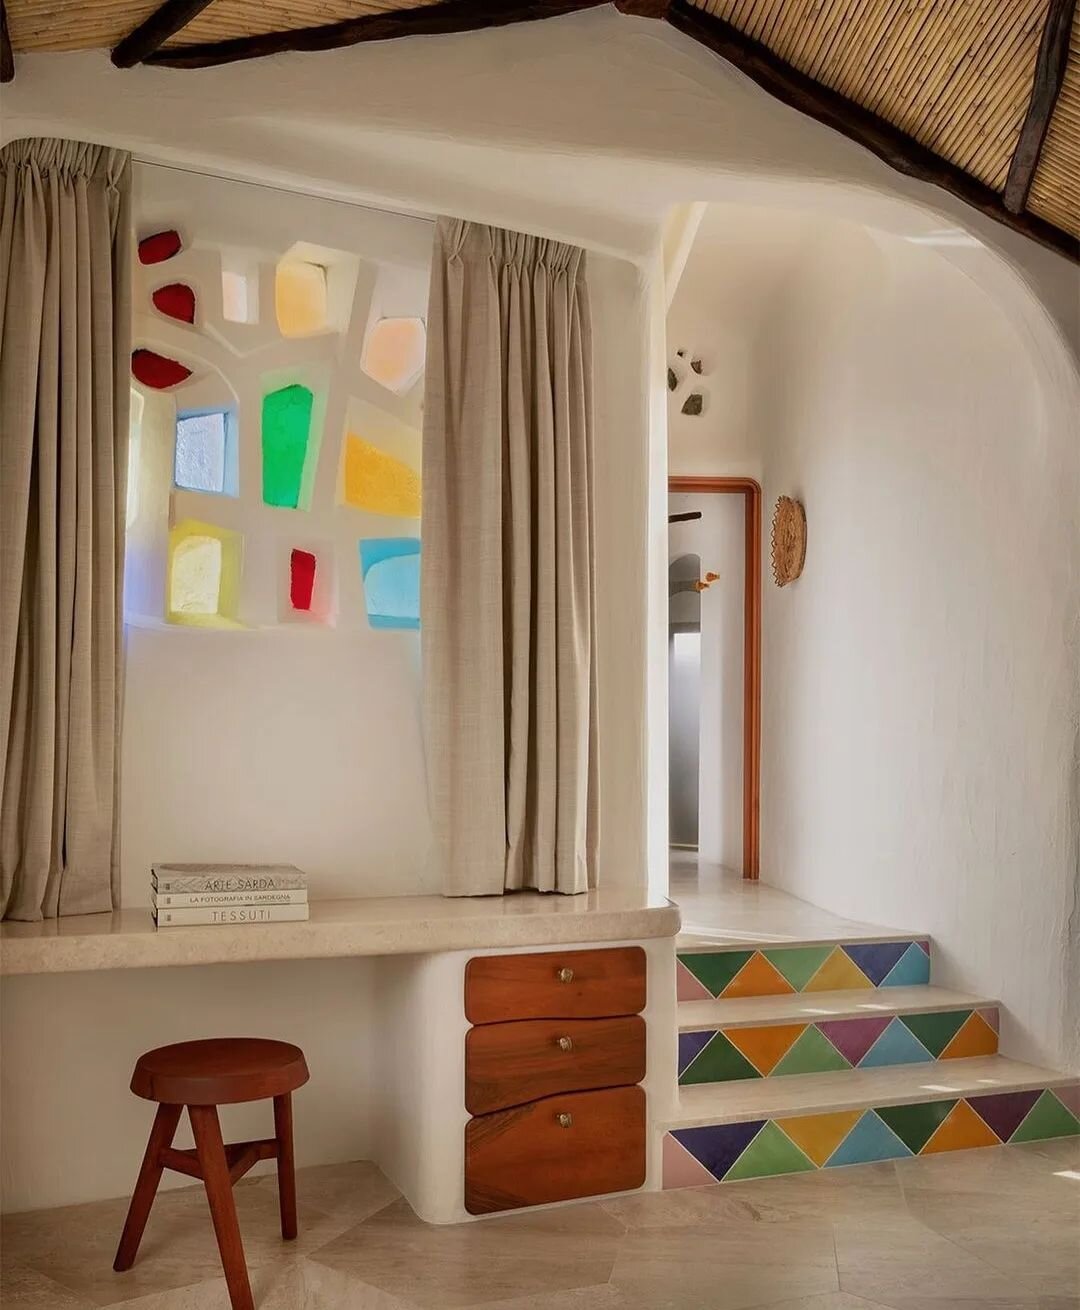 Tiled steps and stained glass inspo at @hotelcaladivolpe via @aconsideredspace